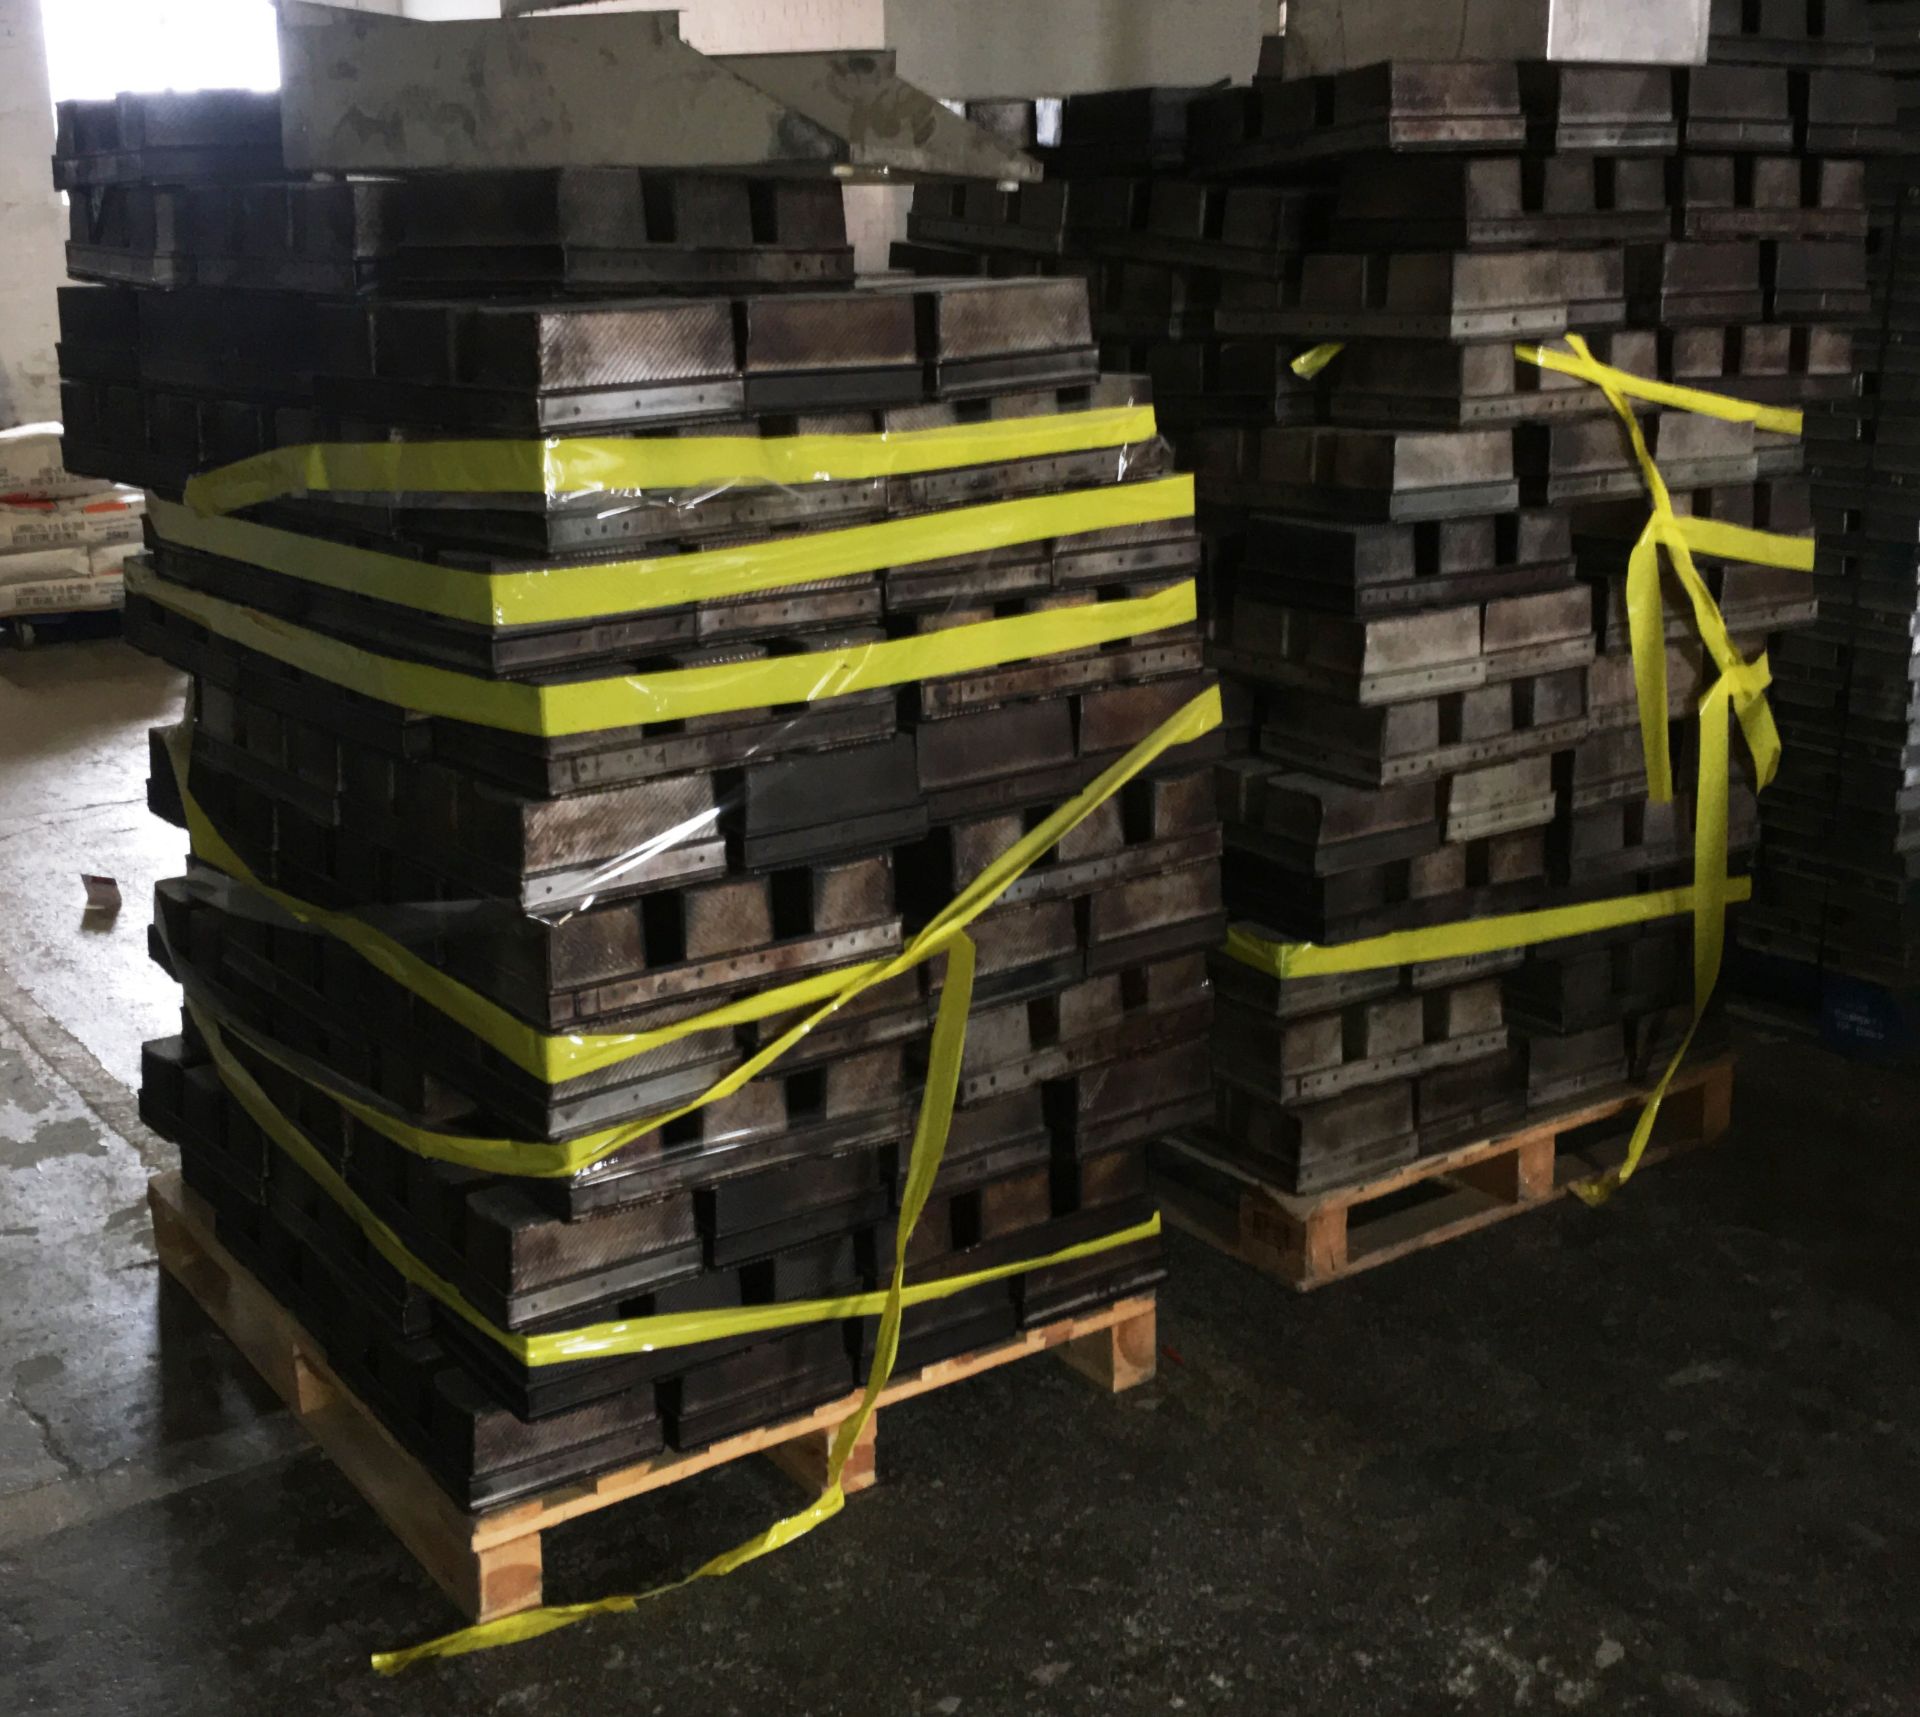 2 x Pallets of Spare/Used Metal Cake Tins - Approximately 150 per Pallet